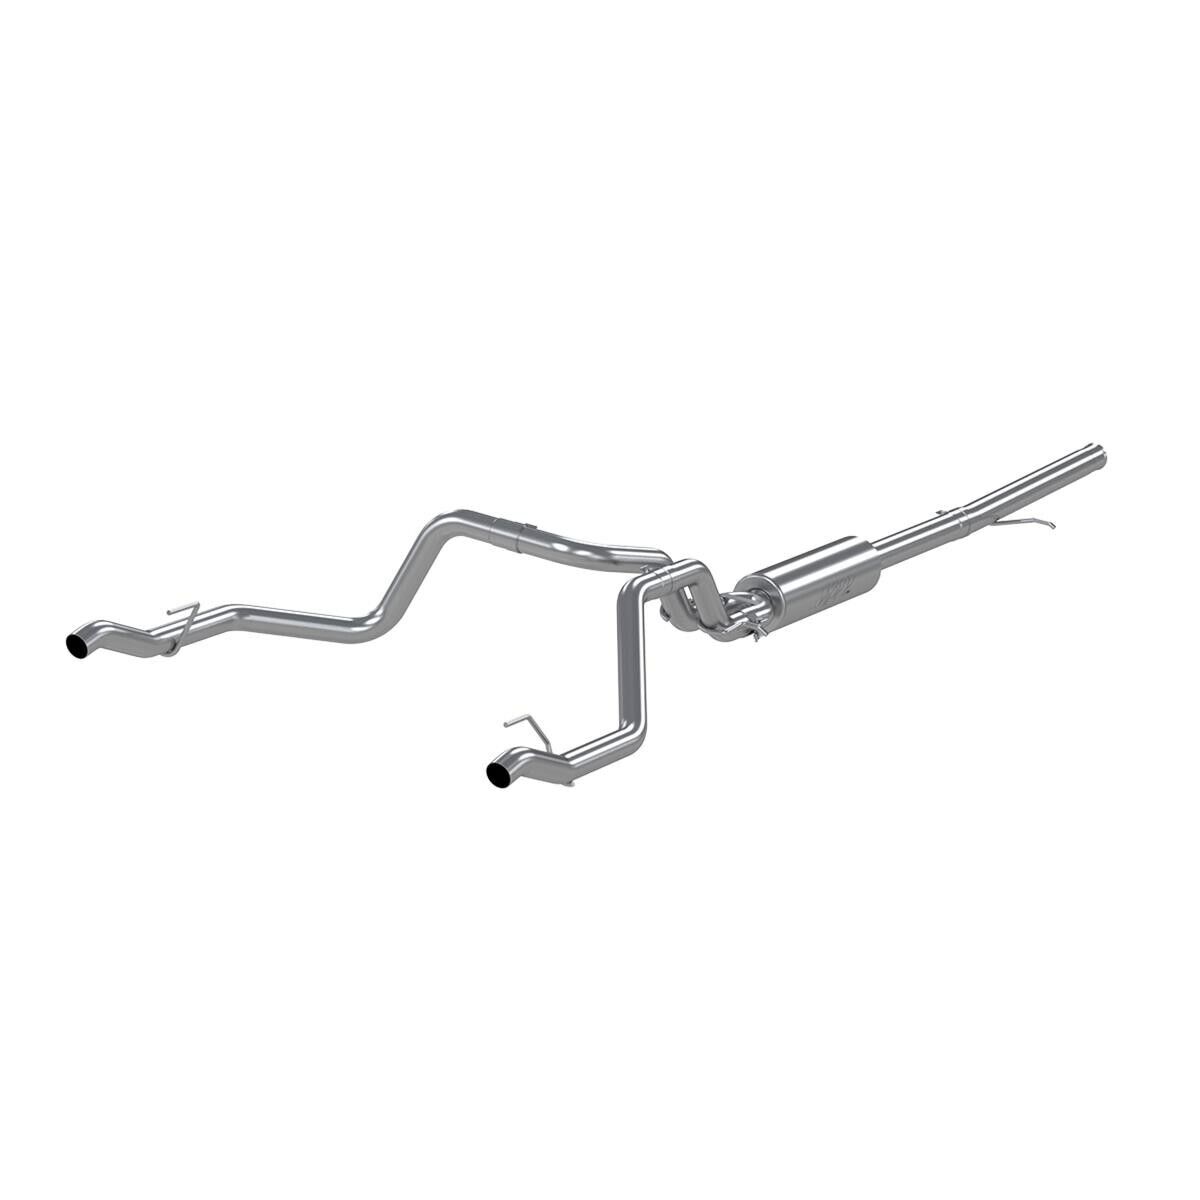 MBRP CatBack Exhaust System 3'' 2.5'' Pipe Fits 22 Chevy Silverado 1500 LTD